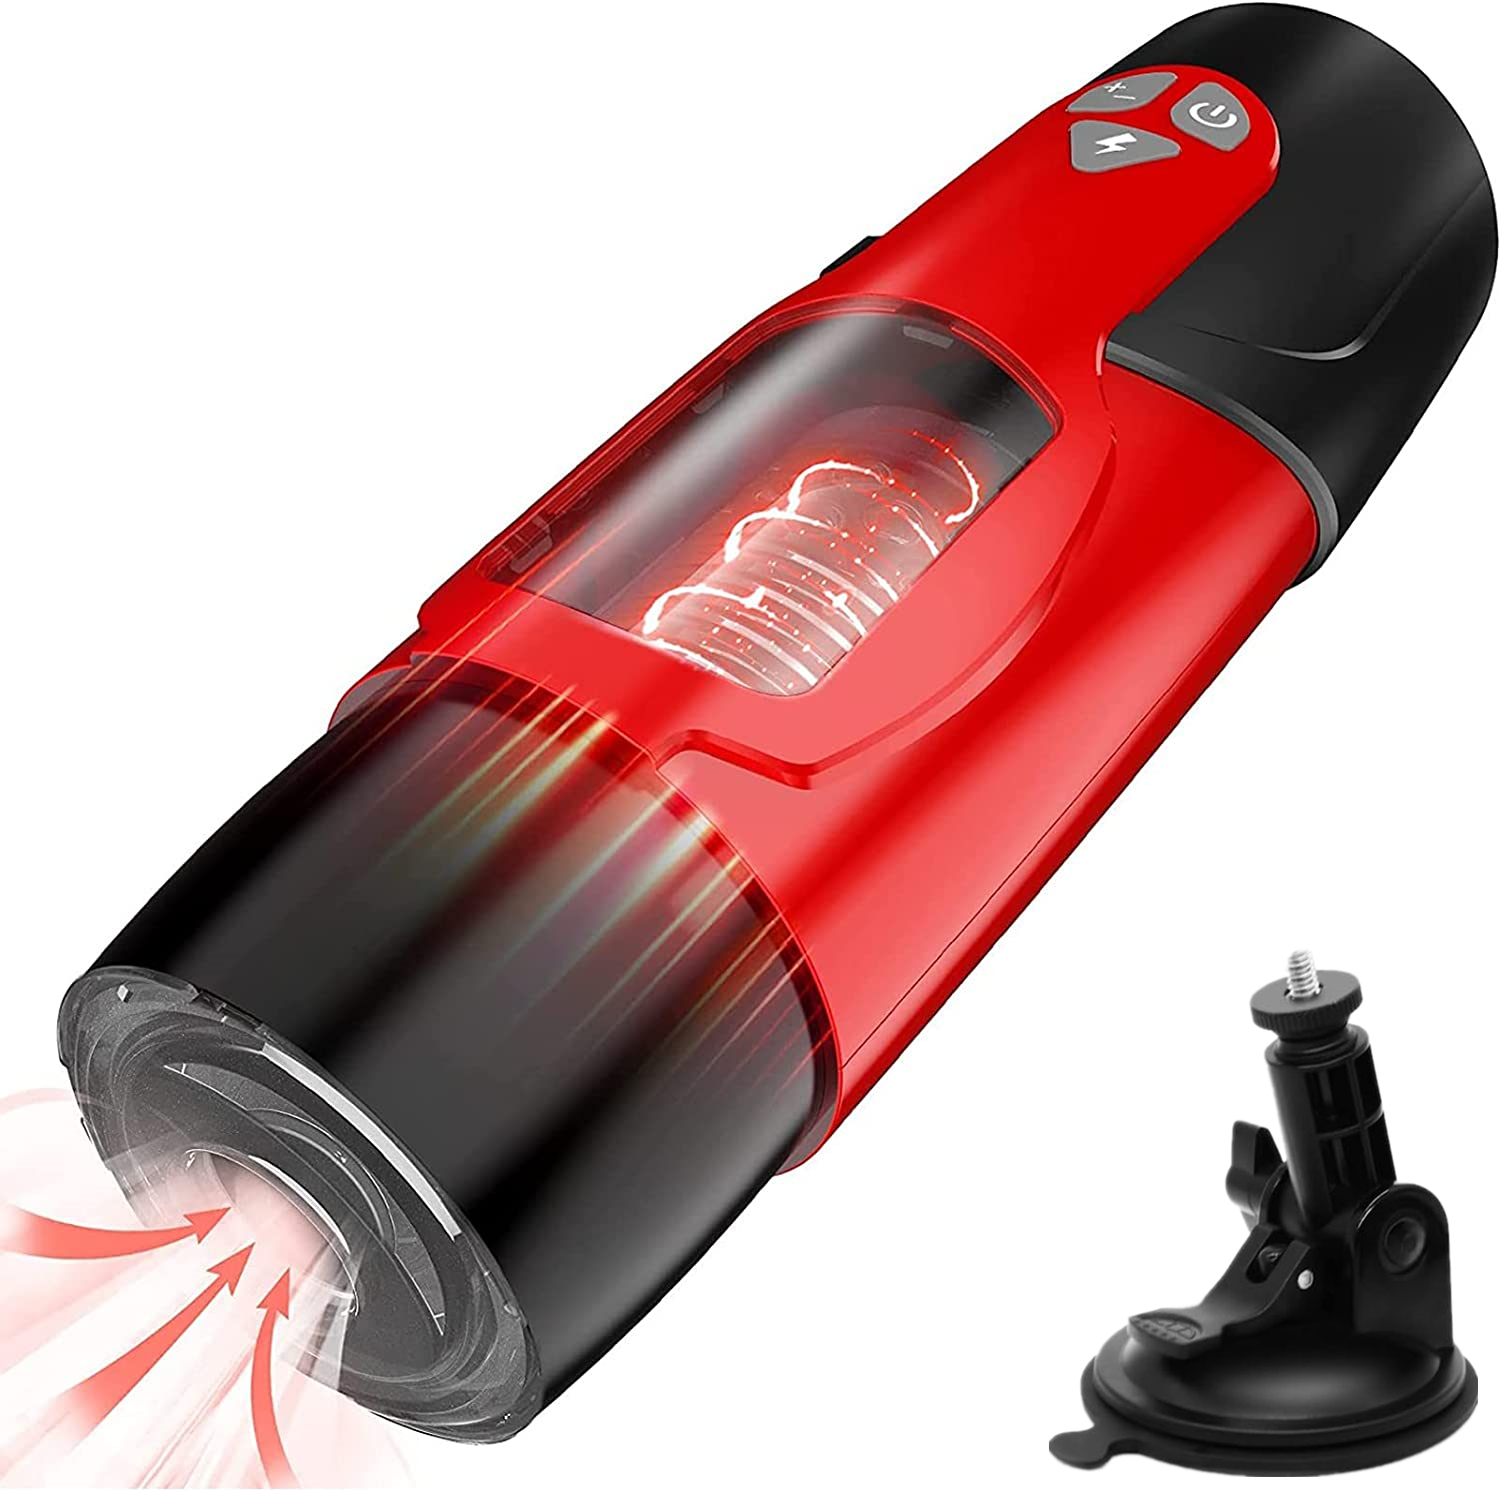 Automatic Male Masturbator Cup with 7 Powerful Thrusting Rotating Modes for Penis Stimulation, Adult Electric Pocket Stroker Male Sex Toys for